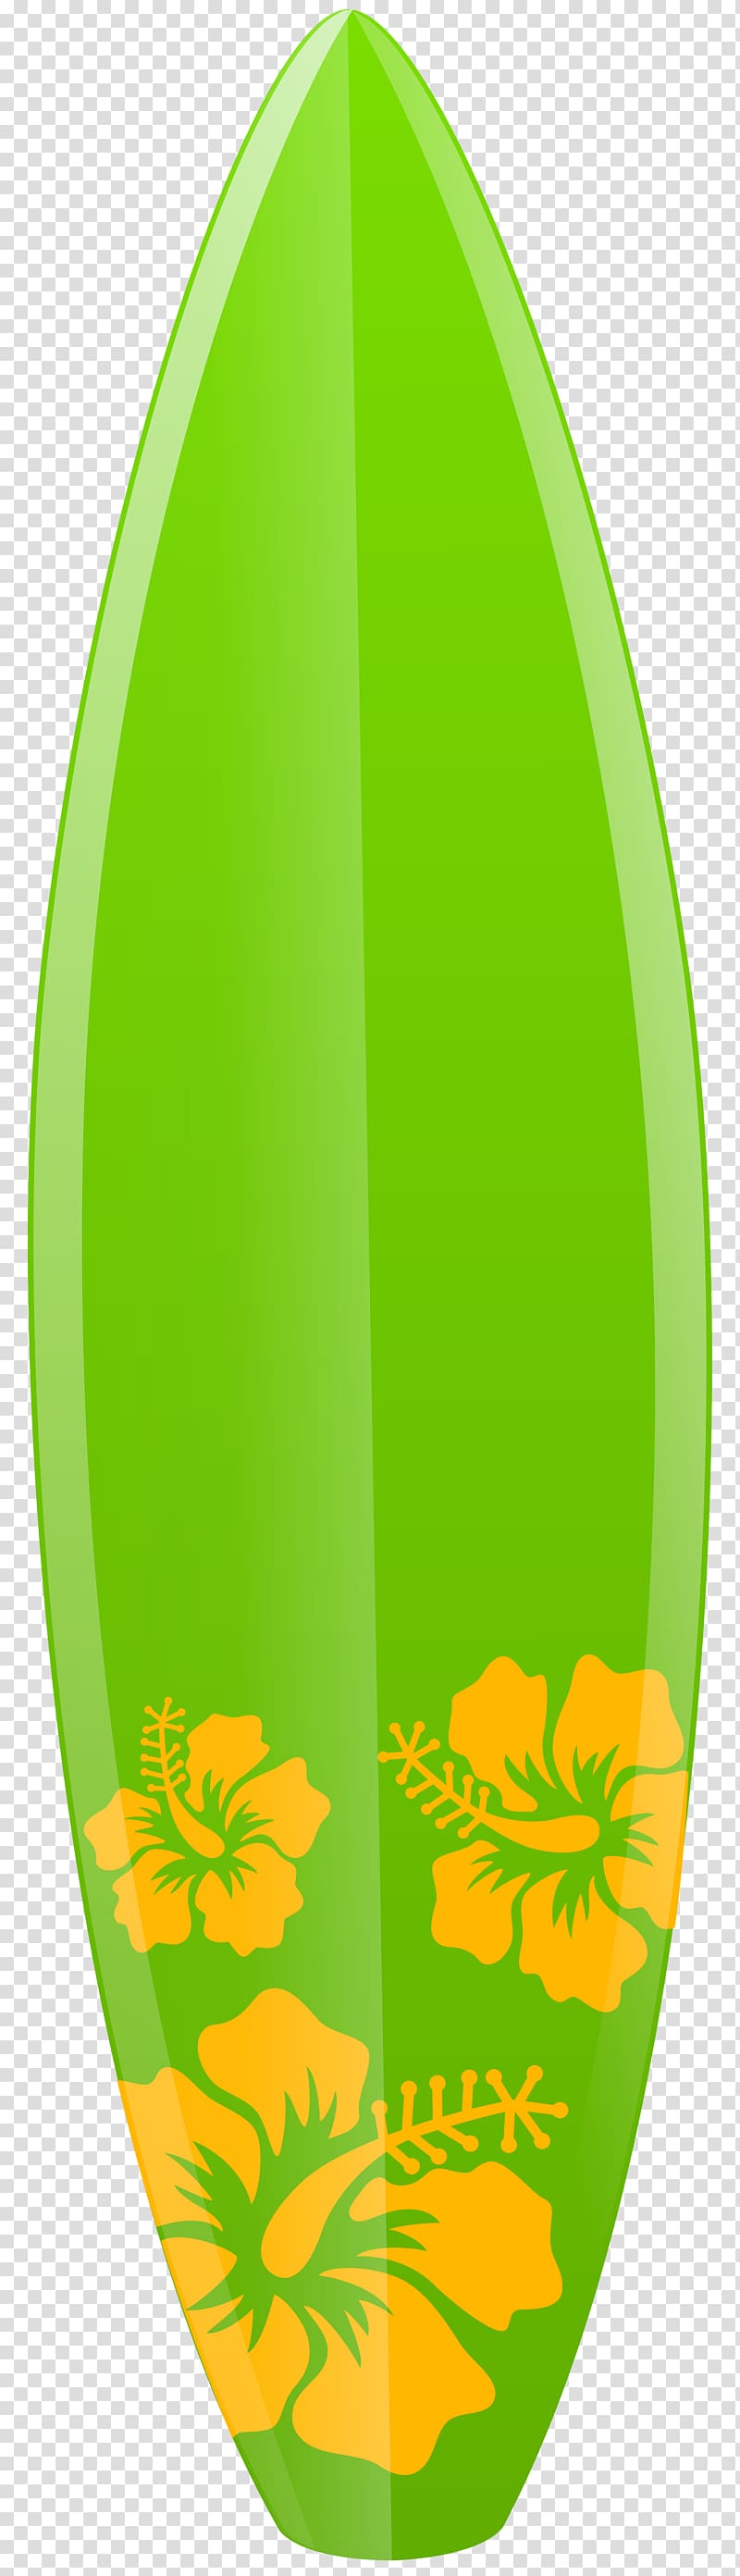 Surfboard Surfing , surfboard transparent background PNG clipart